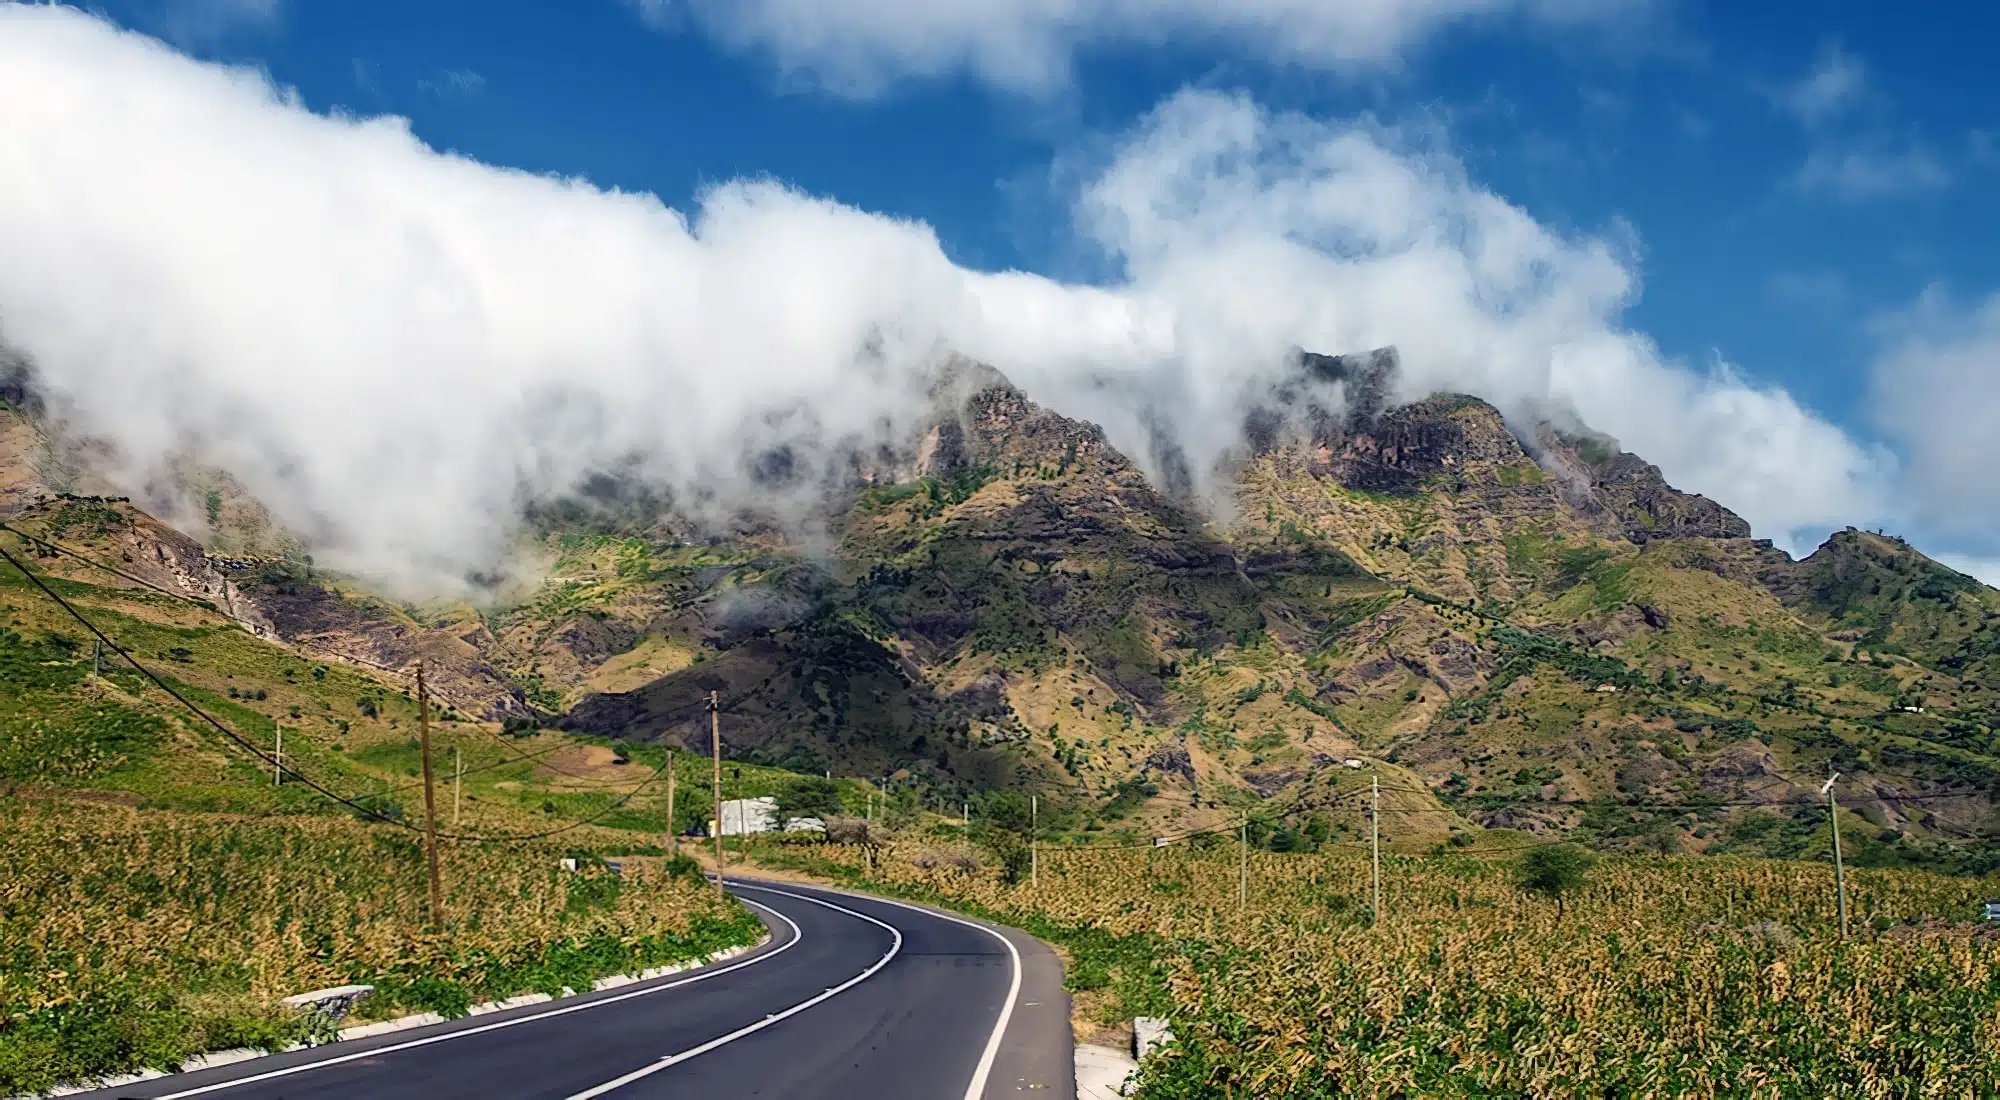 The 14 essential things to do in Cape Verde